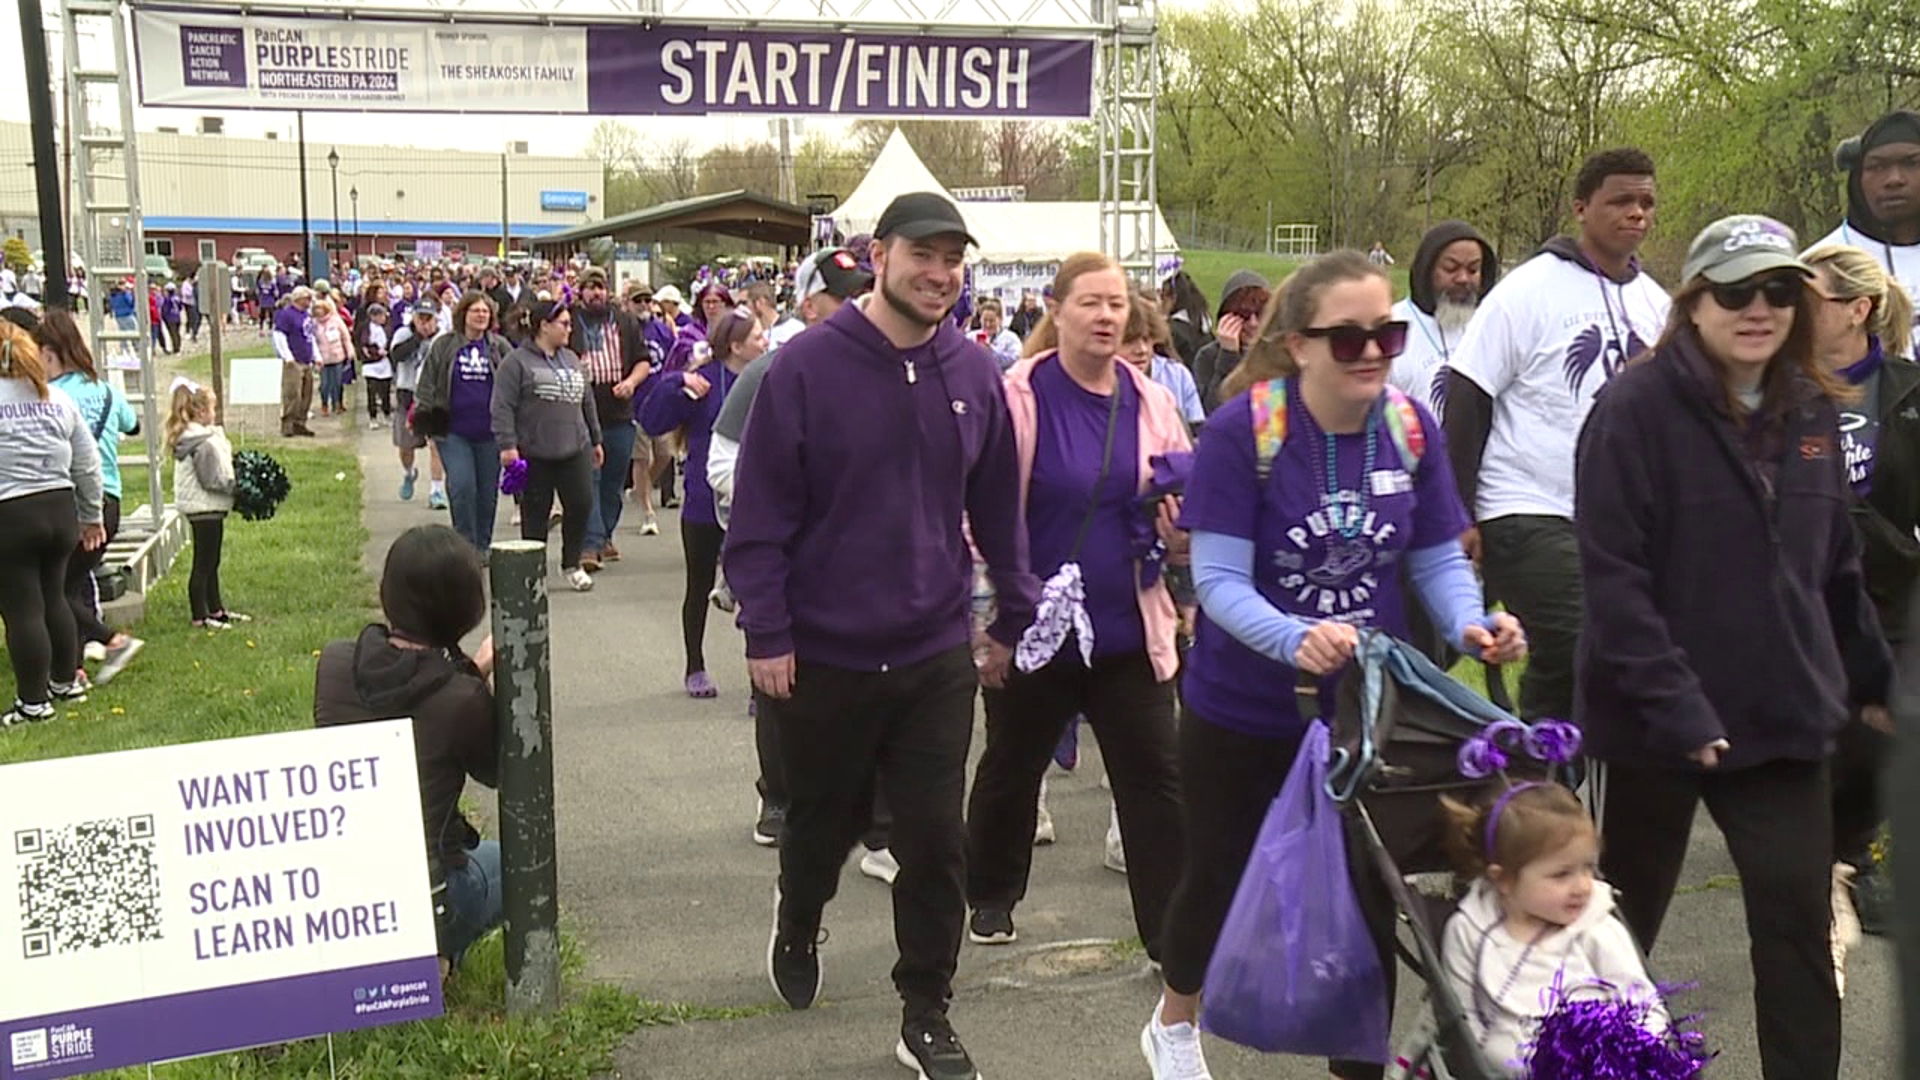 The PurpleStride walk supports the Pancreatic Cancer Action Network.